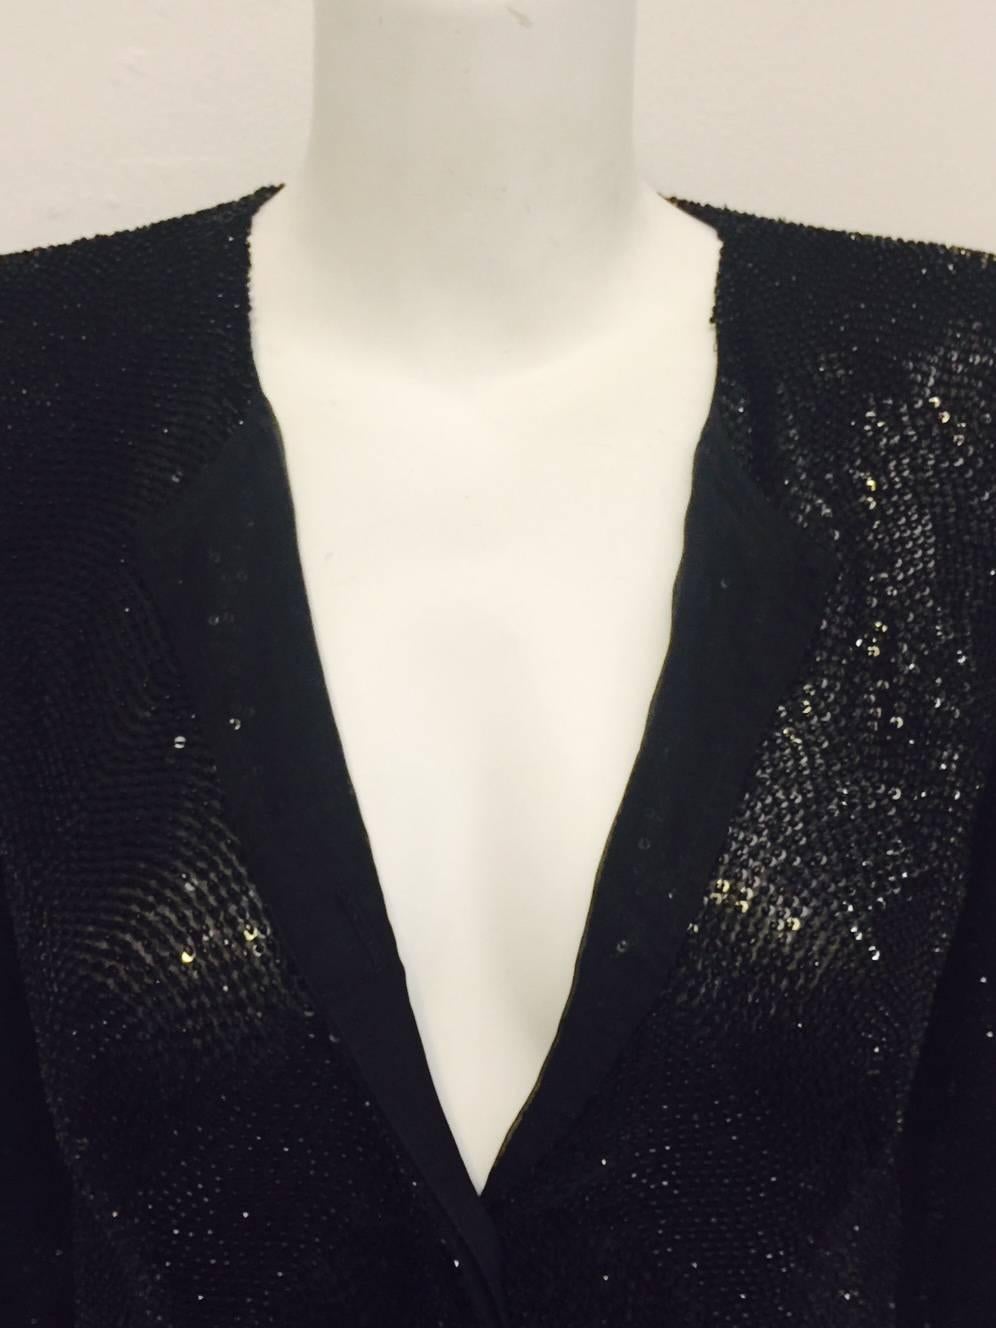 Astonishing Giorgio Armani Black Silk Embroidered Jacket W. Sequins & Beads In Excellent Condition For Sale In Palm Beach, FL